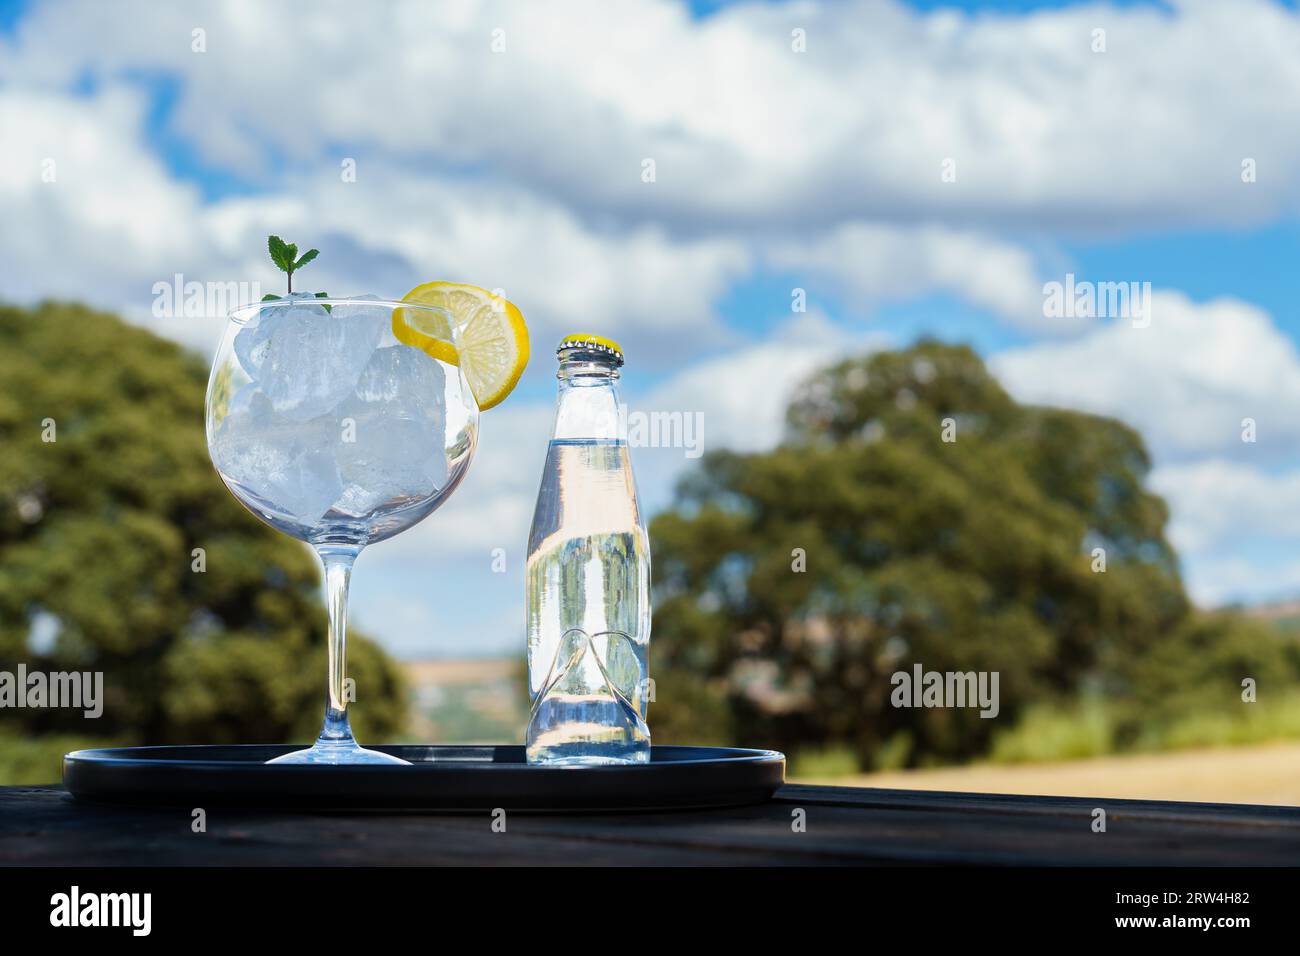 Bottle of tonic with a glass with ice on a black tray and landscape with trees and clouds in the sky out of focus in the background Stock Photo